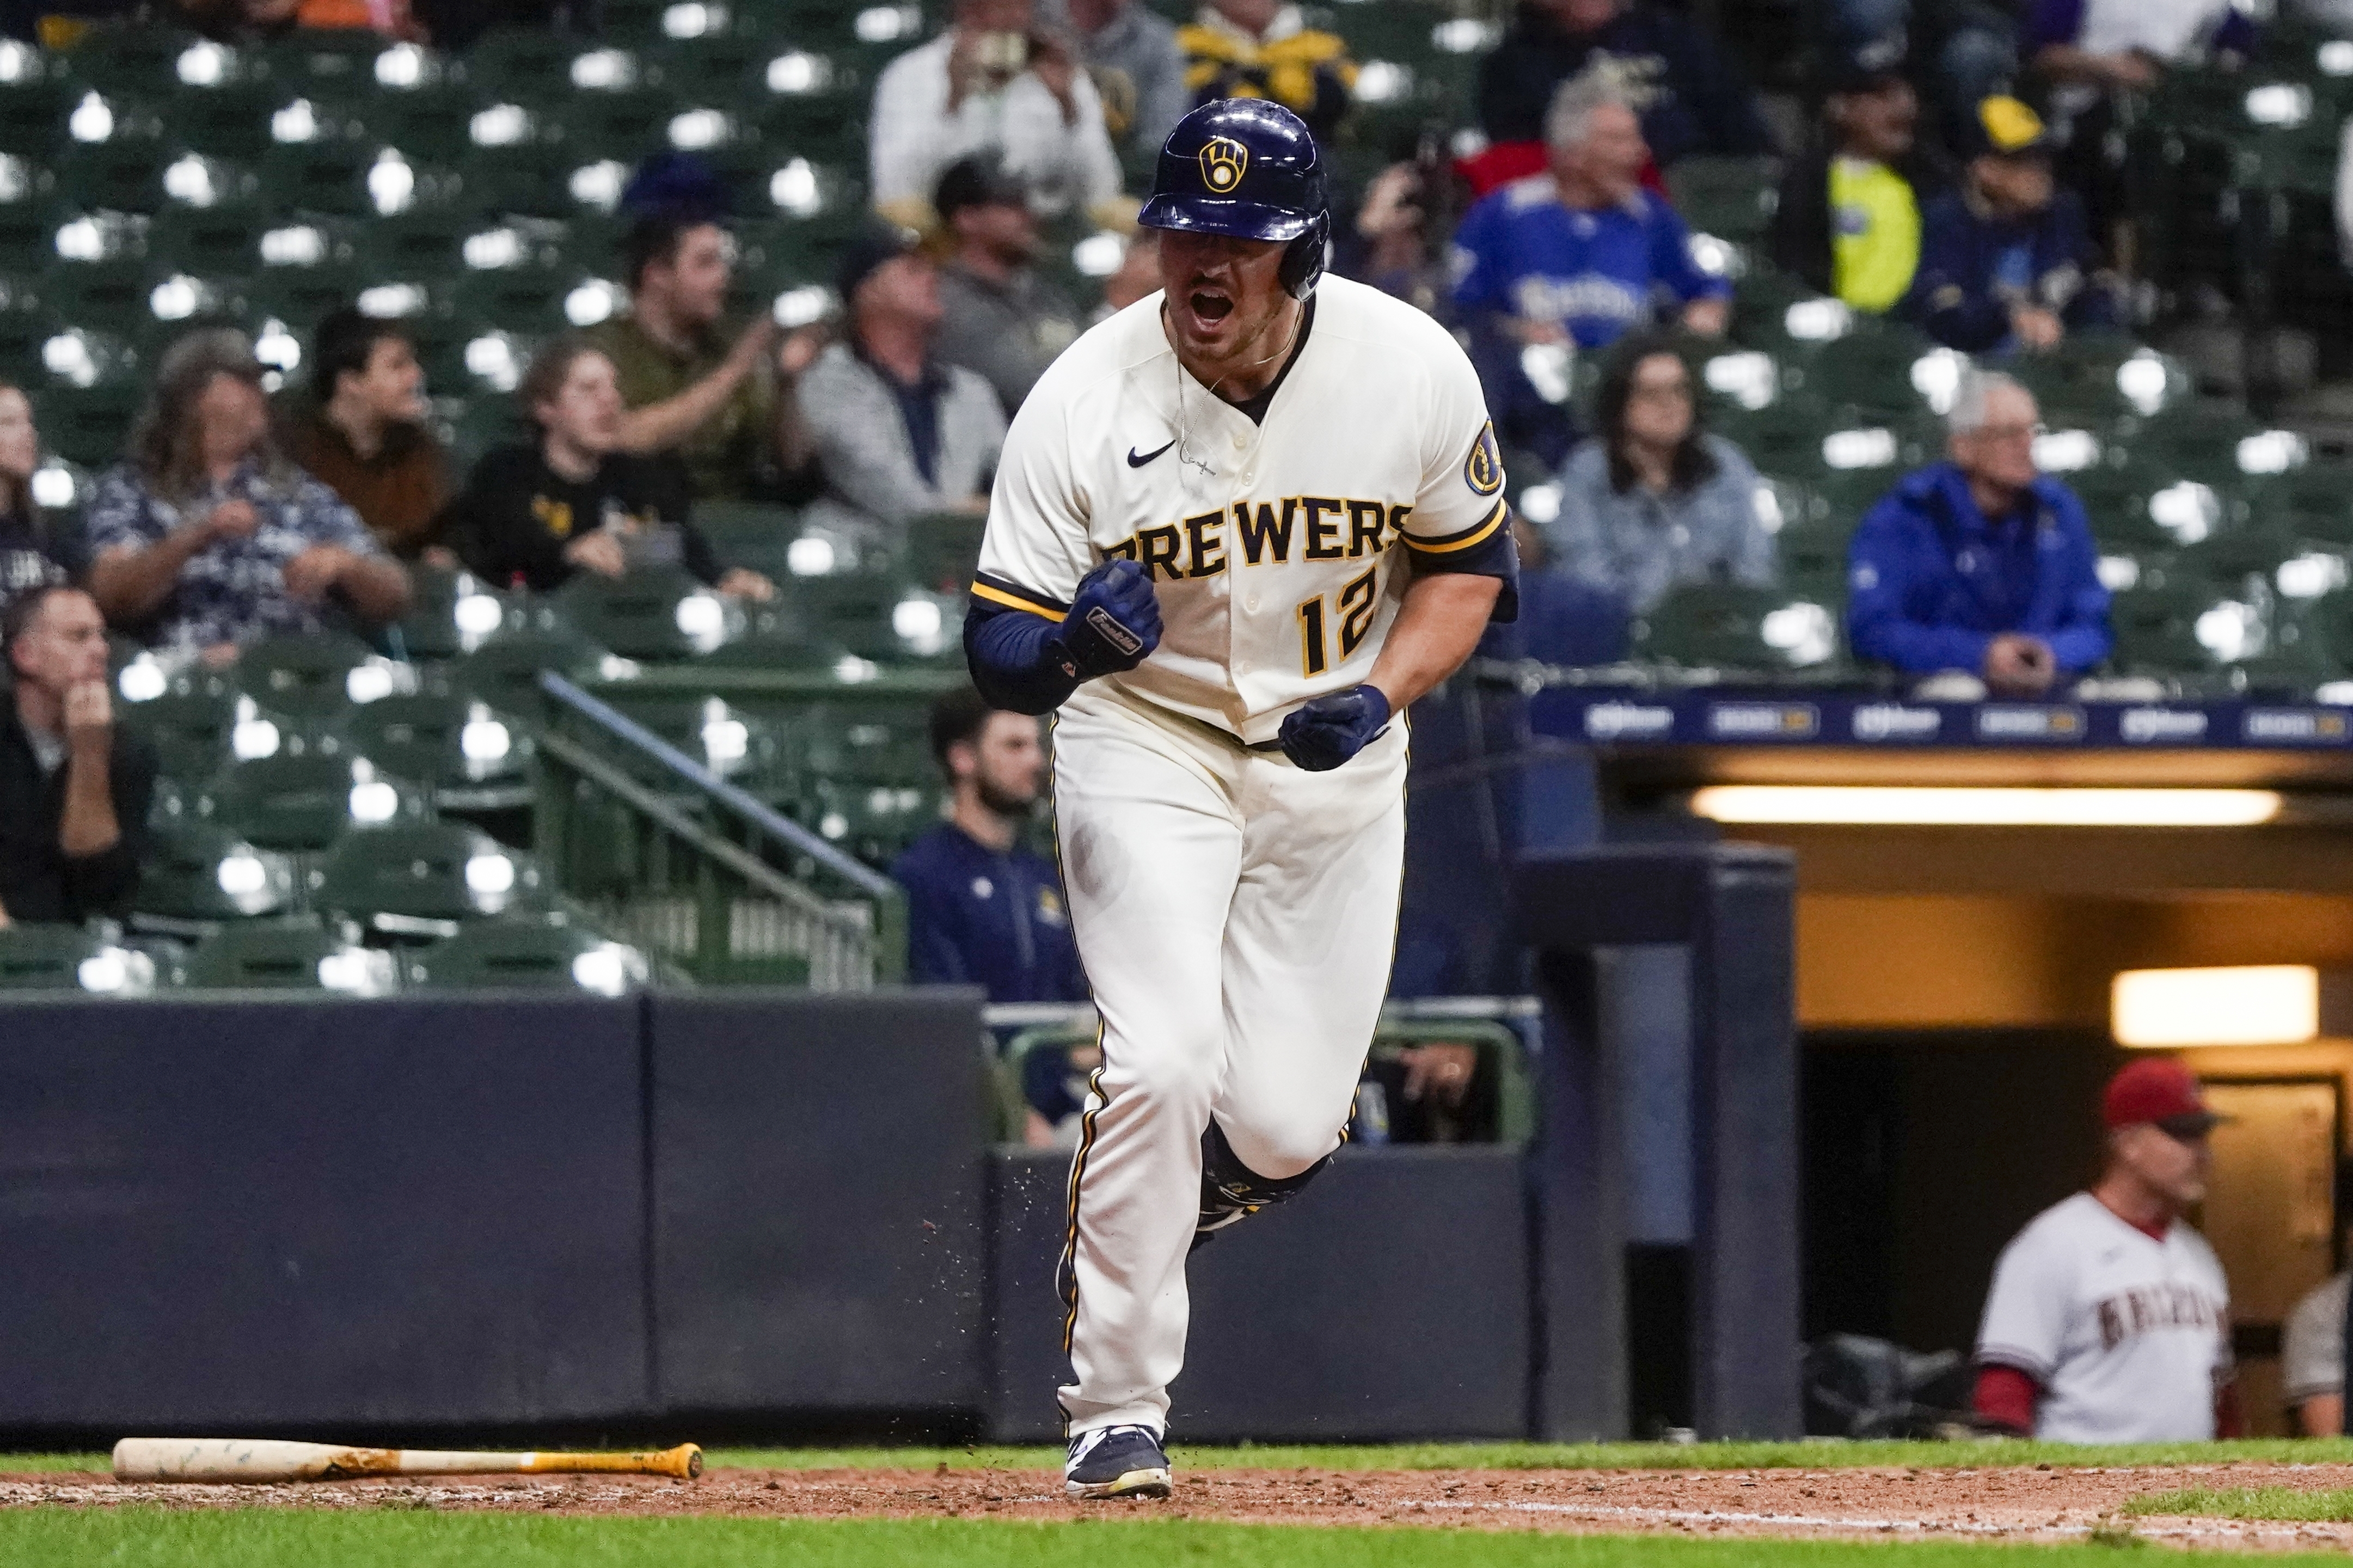 Opposing pitchers have figured out Hunter Renfroe. Can he adjust? - DRaysBay